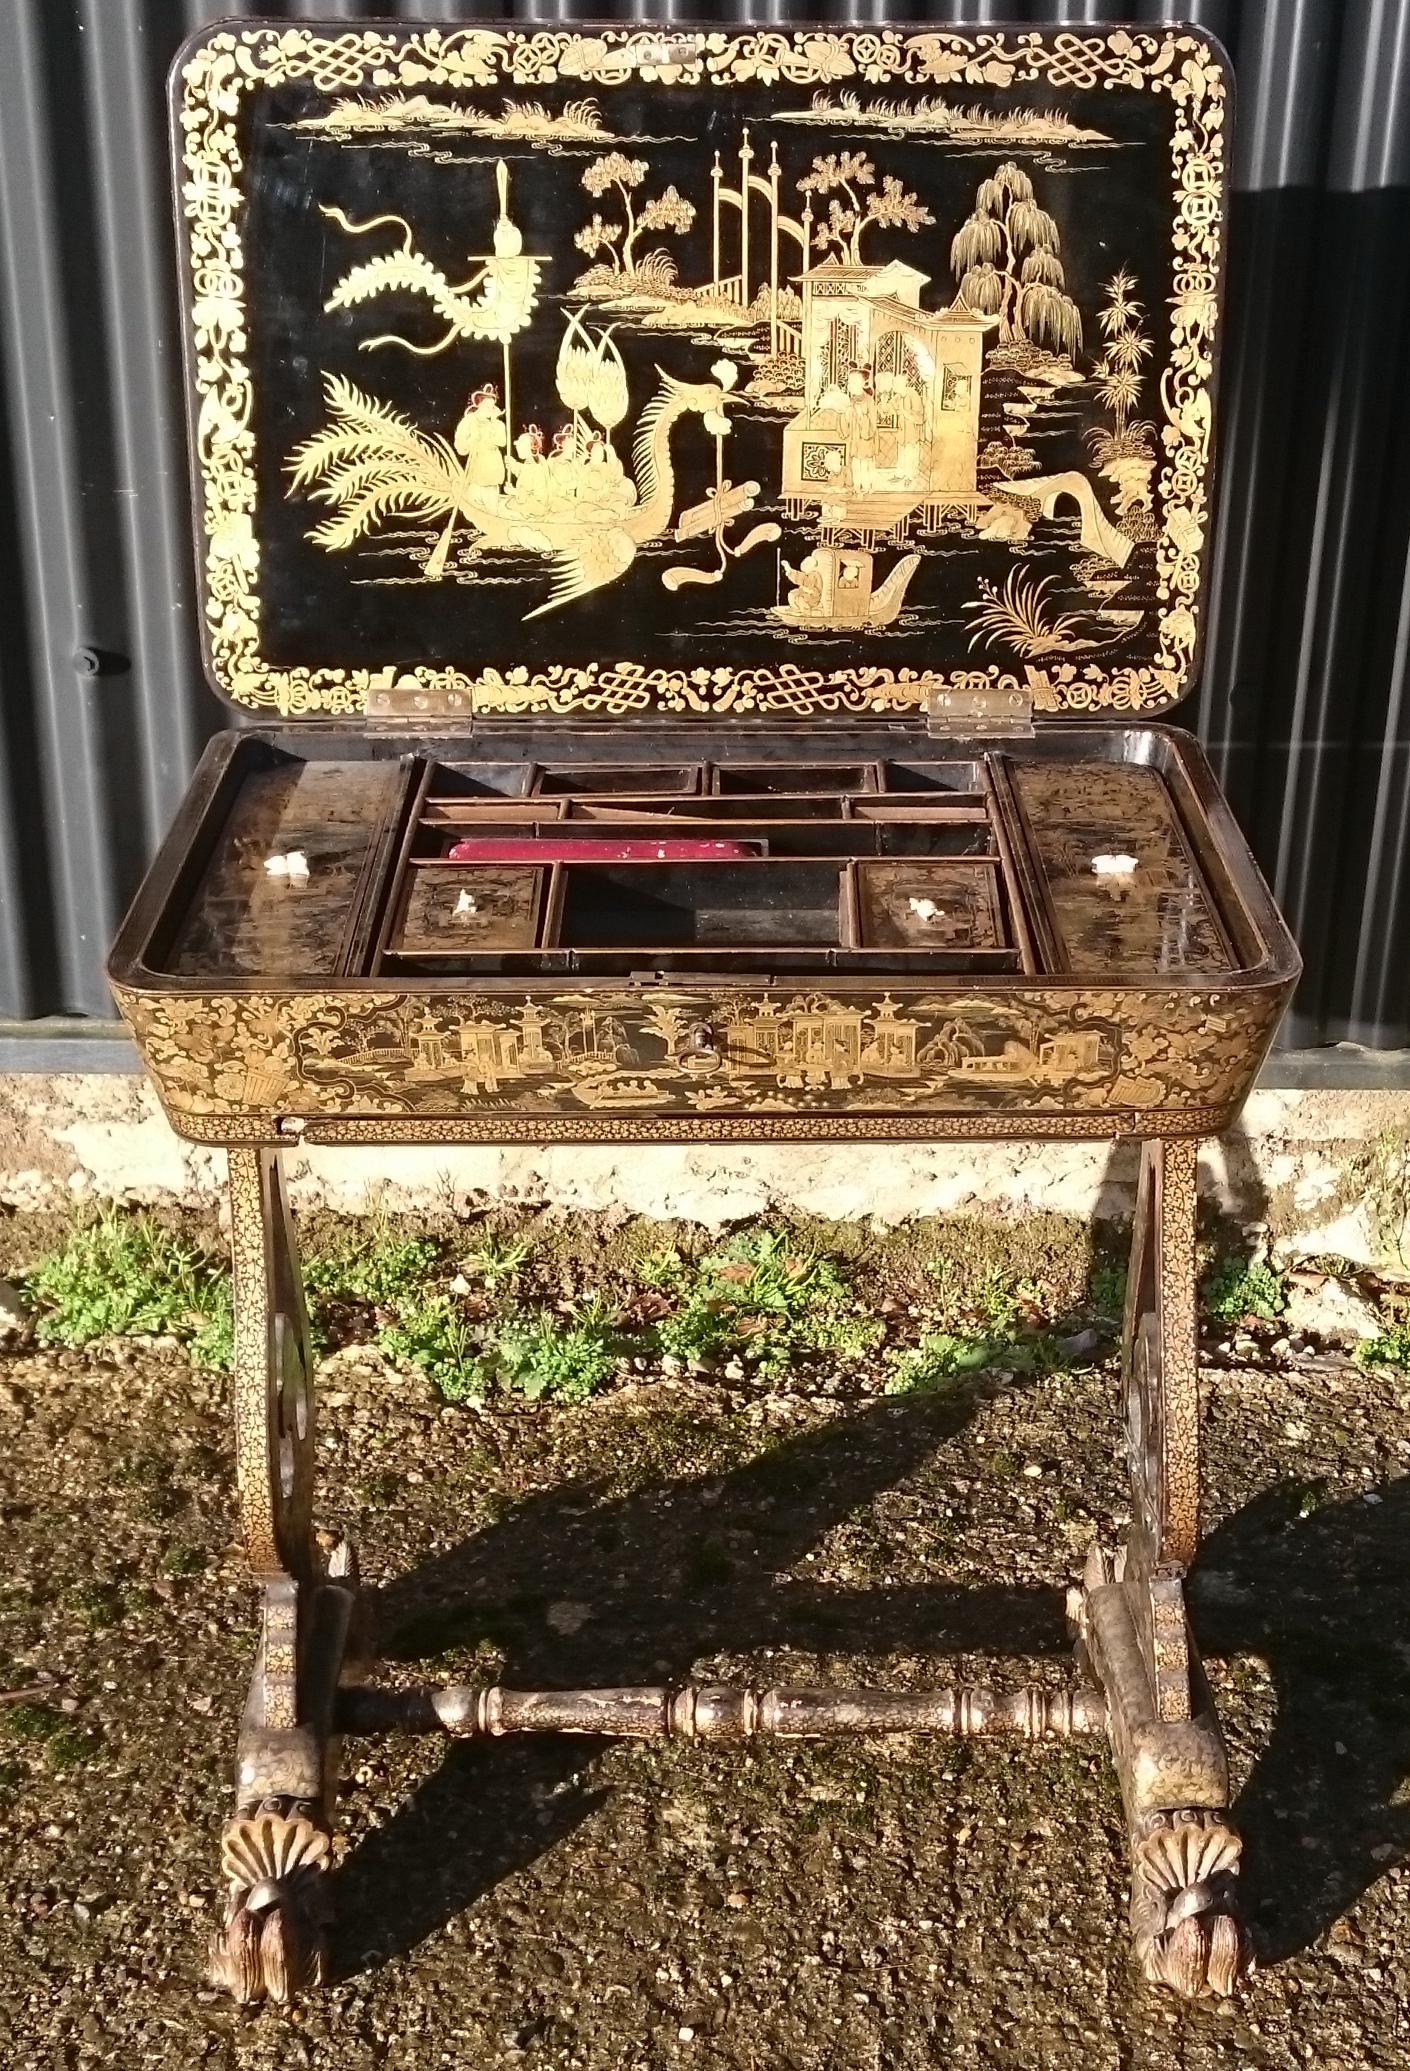 A very fine quality Chinese export lacquer work table. The lid lifts to reveal compartments for needlework tools and storage. The detail of the lacquer work is quite incredible and the whole table is profusely covered, even the inside of the legs